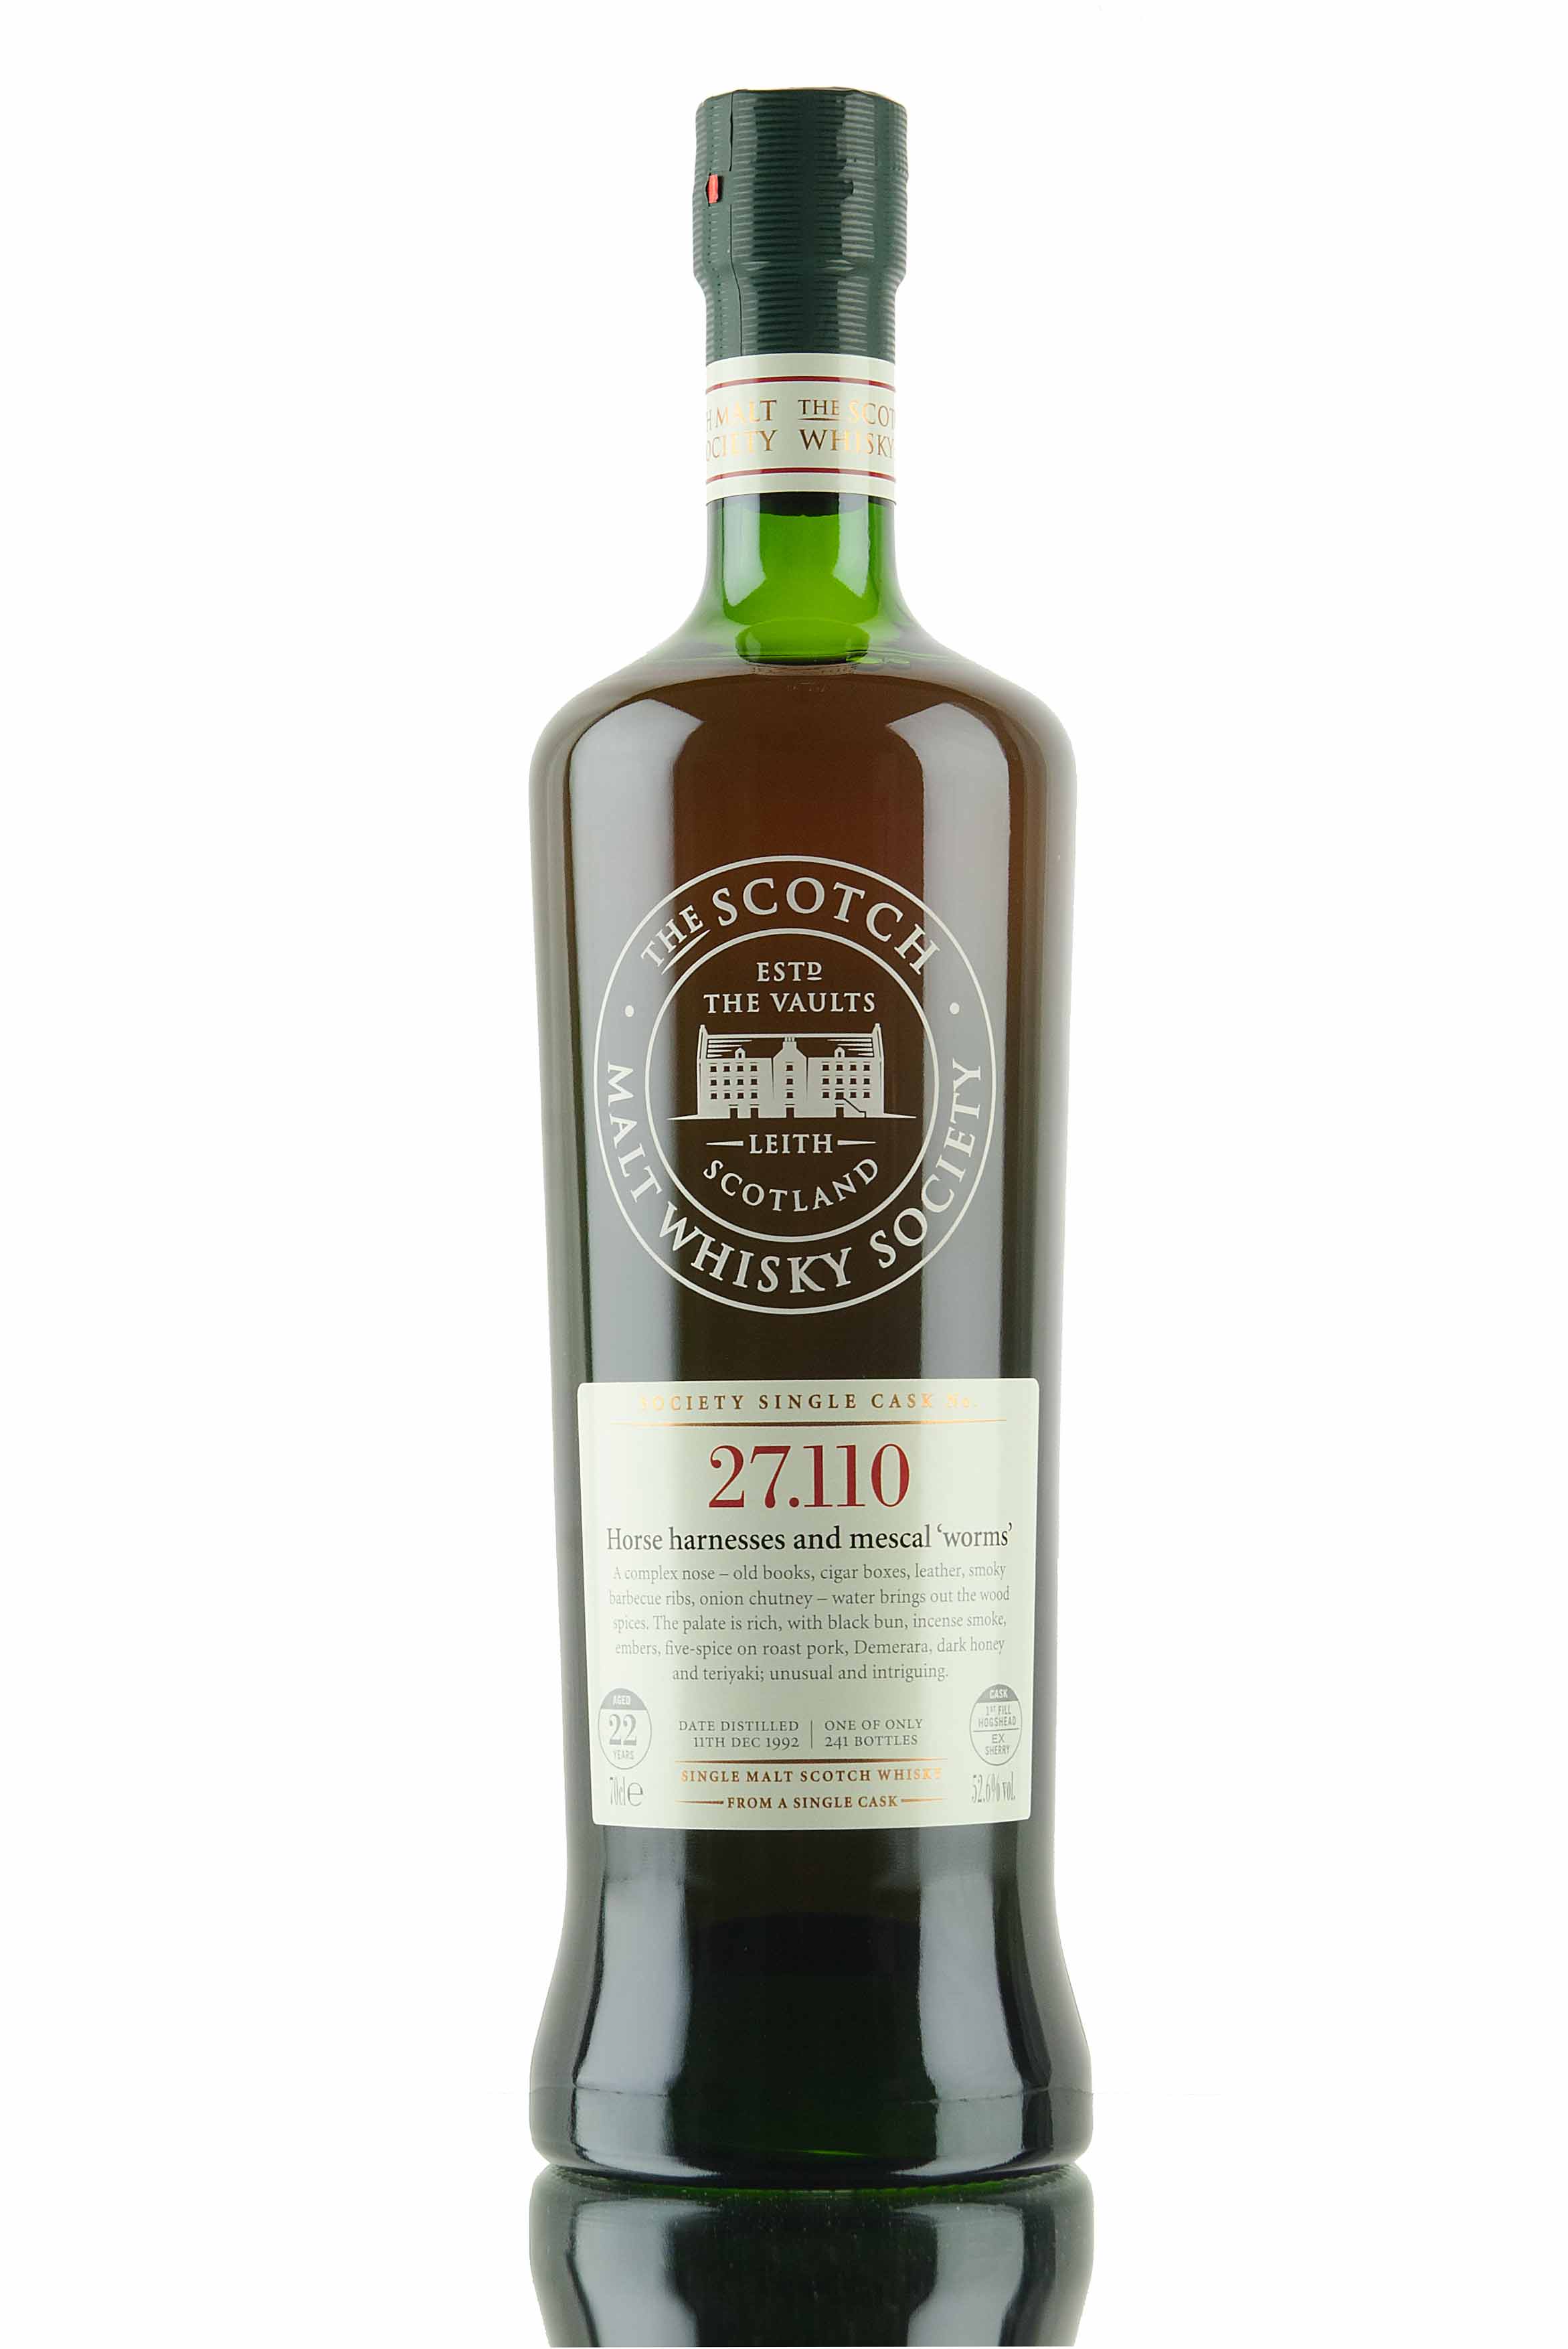 Springbank 22 Year Old - 1992 / SMWS 27.110